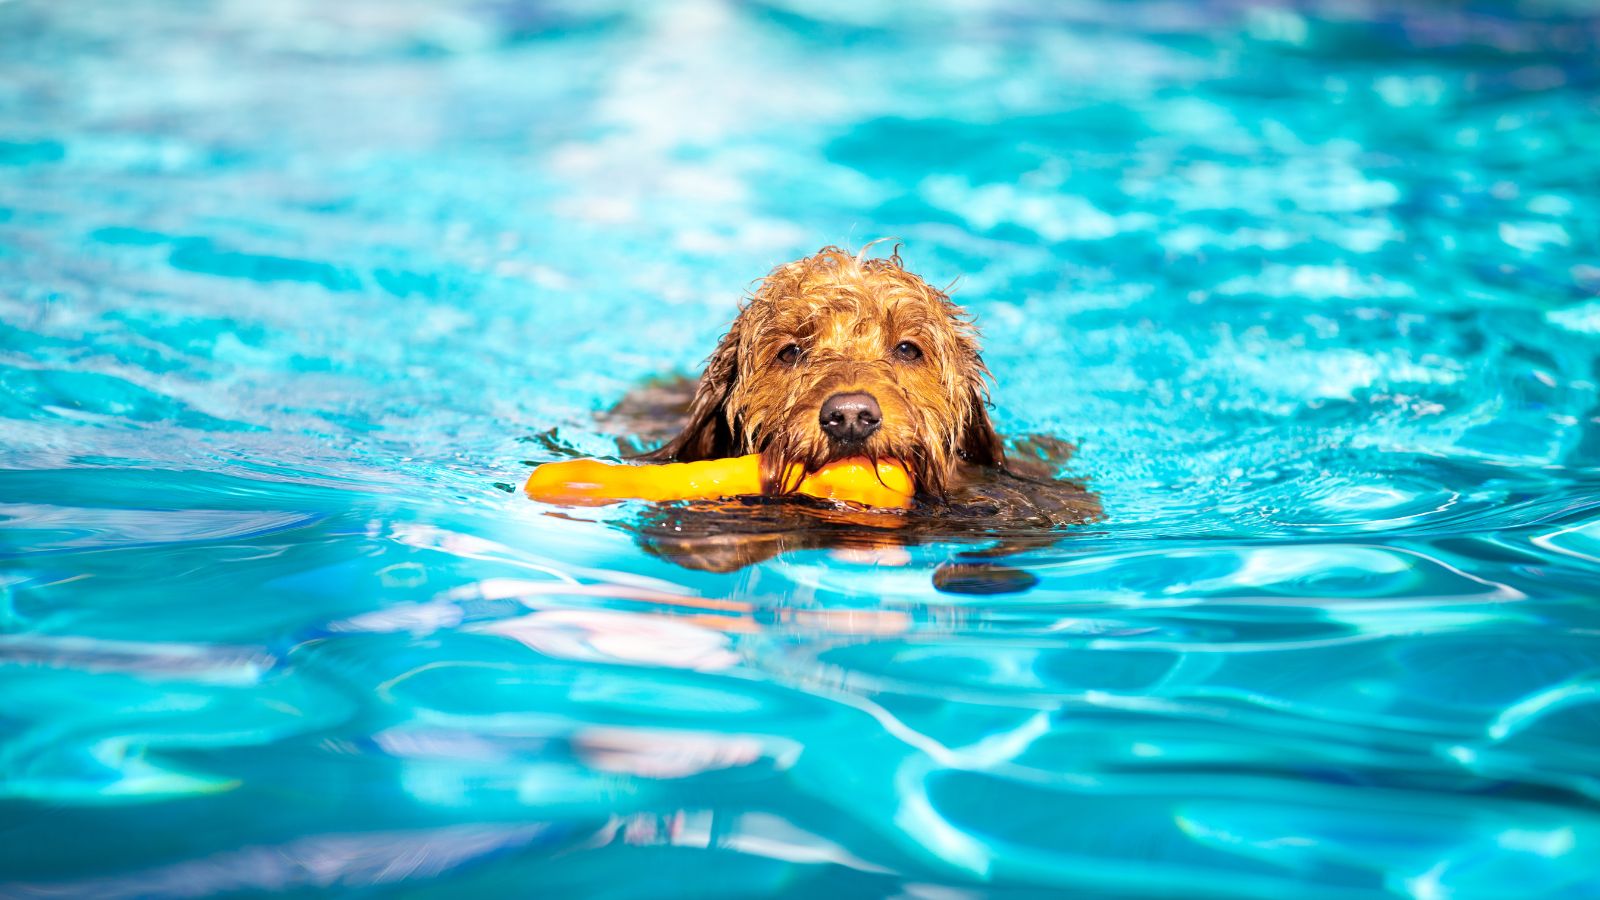 A mini golden doodle swimming in a pool